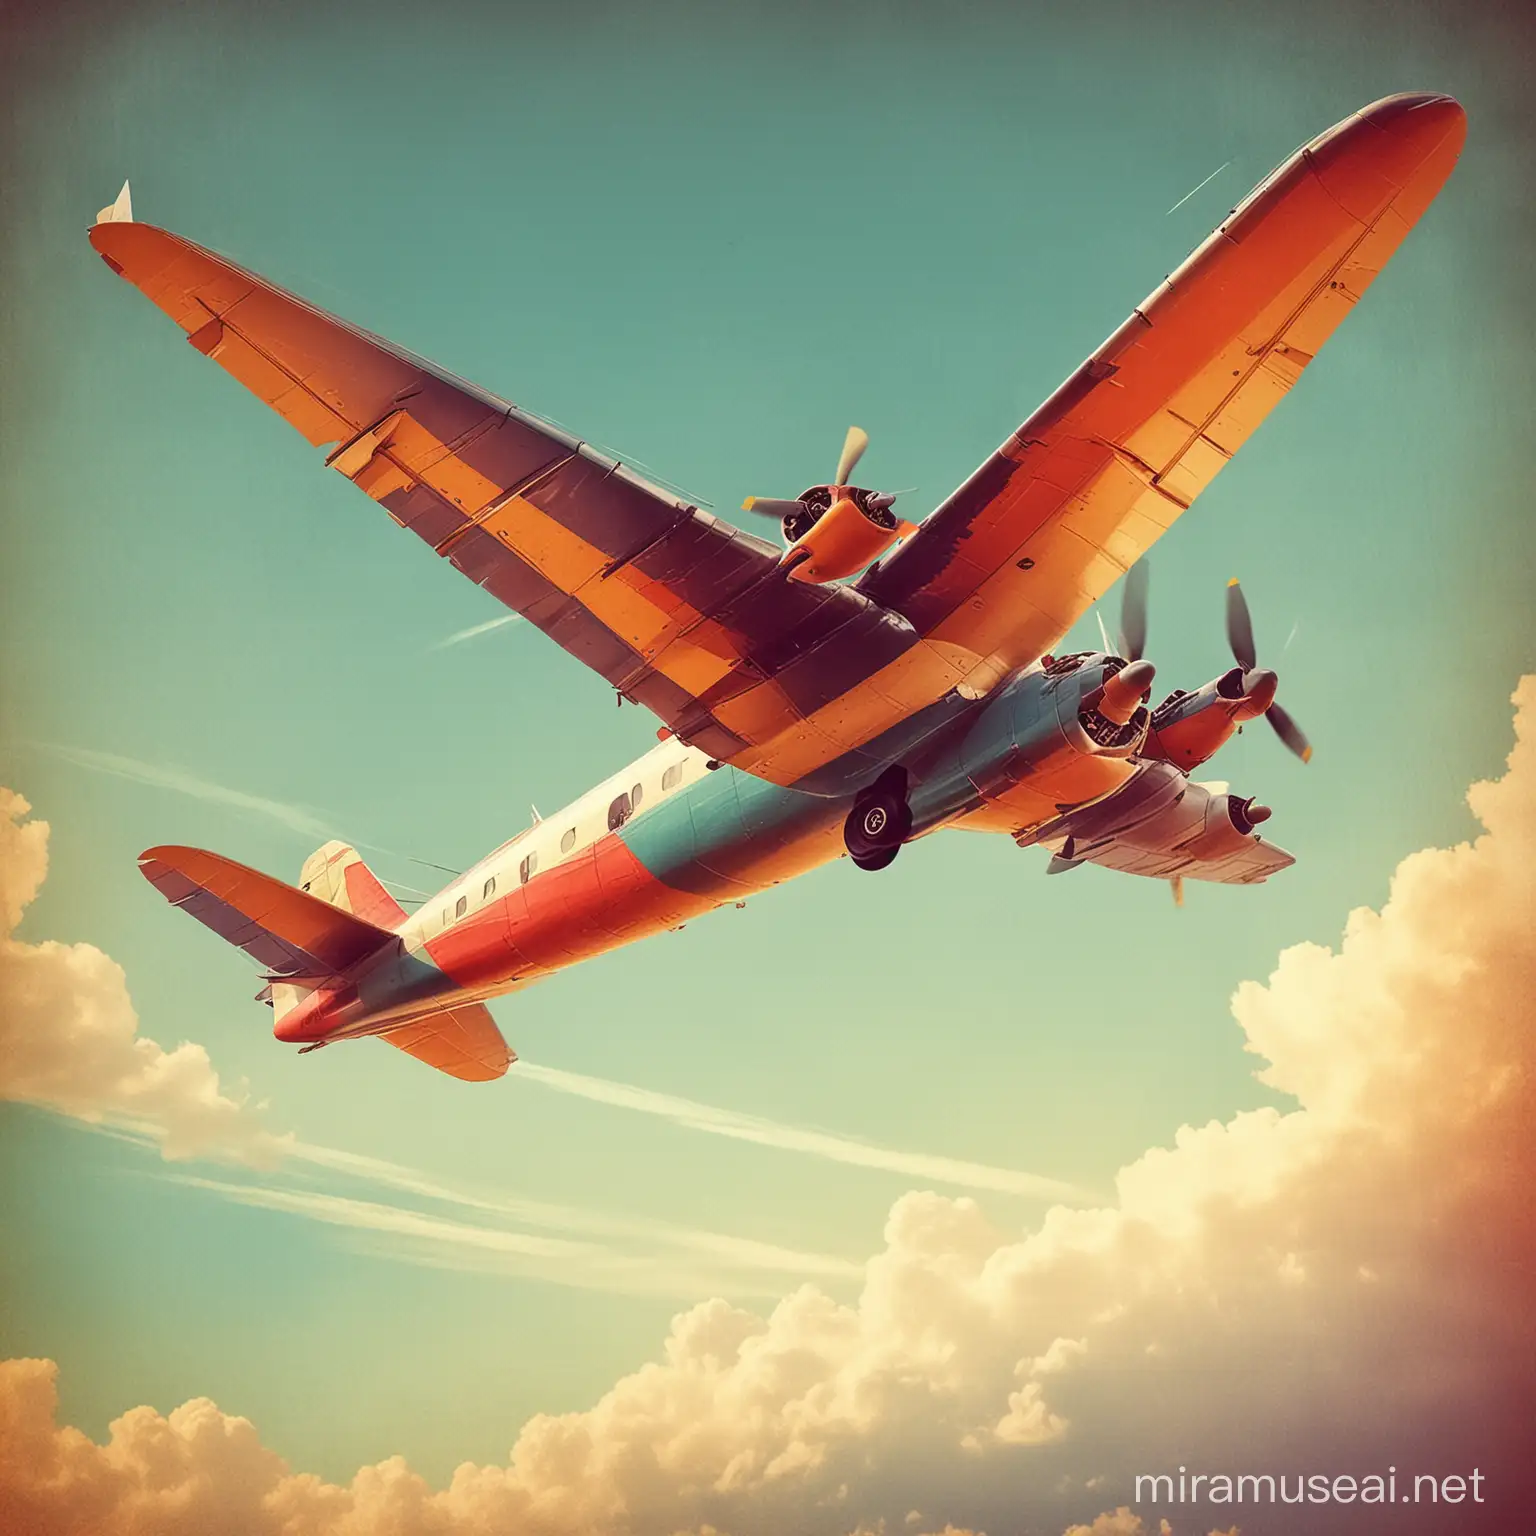 Colorful Vintage Poster Airplane Soaring Through the Skies